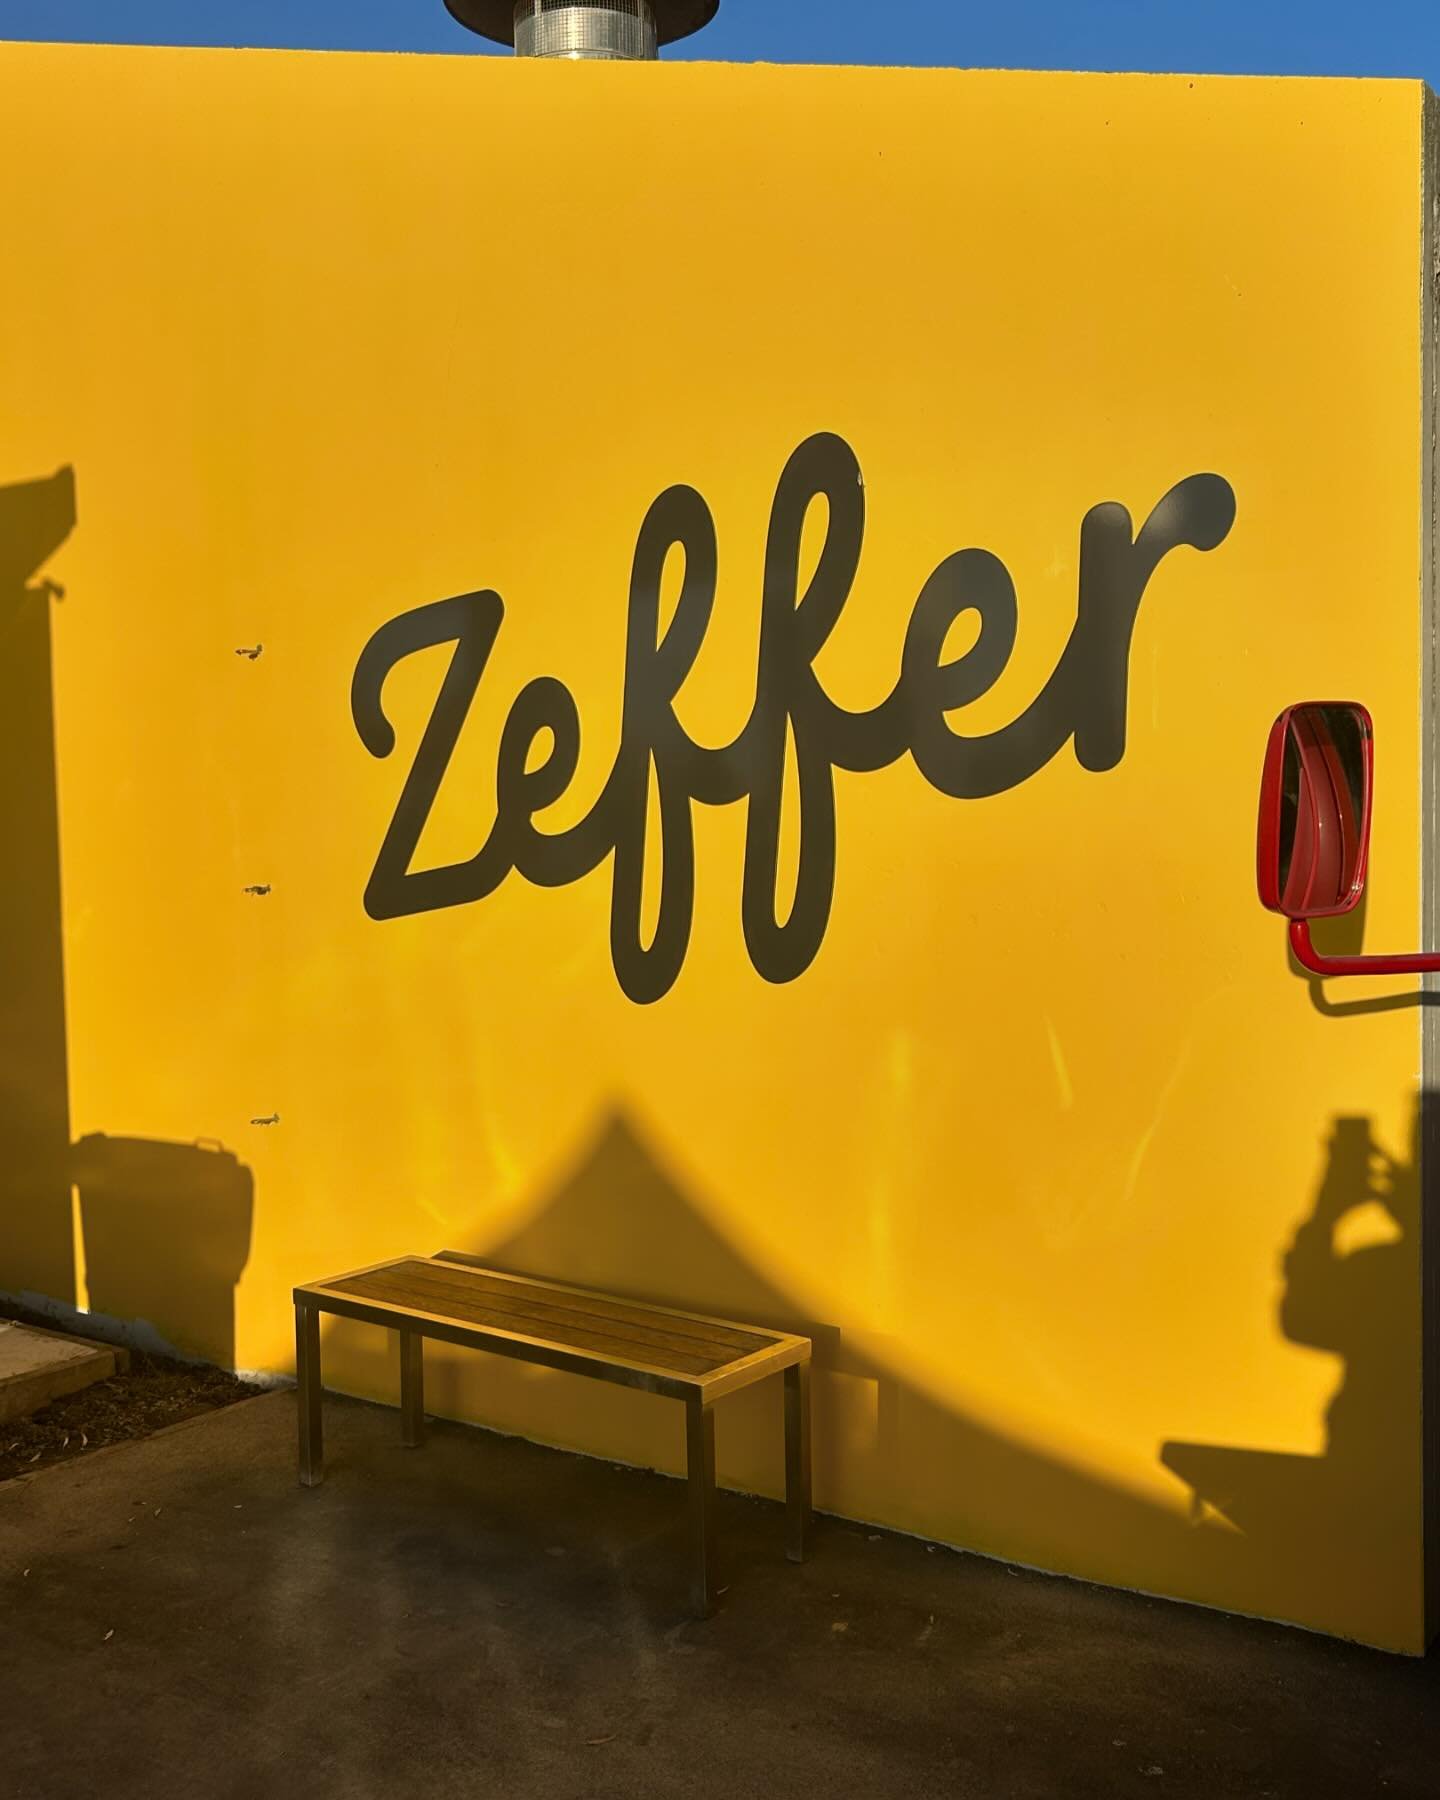 Zeffer flood re-build and extension to their operation was great to see. Huge turn out to the opening. Congratulations to @zefferdrinks